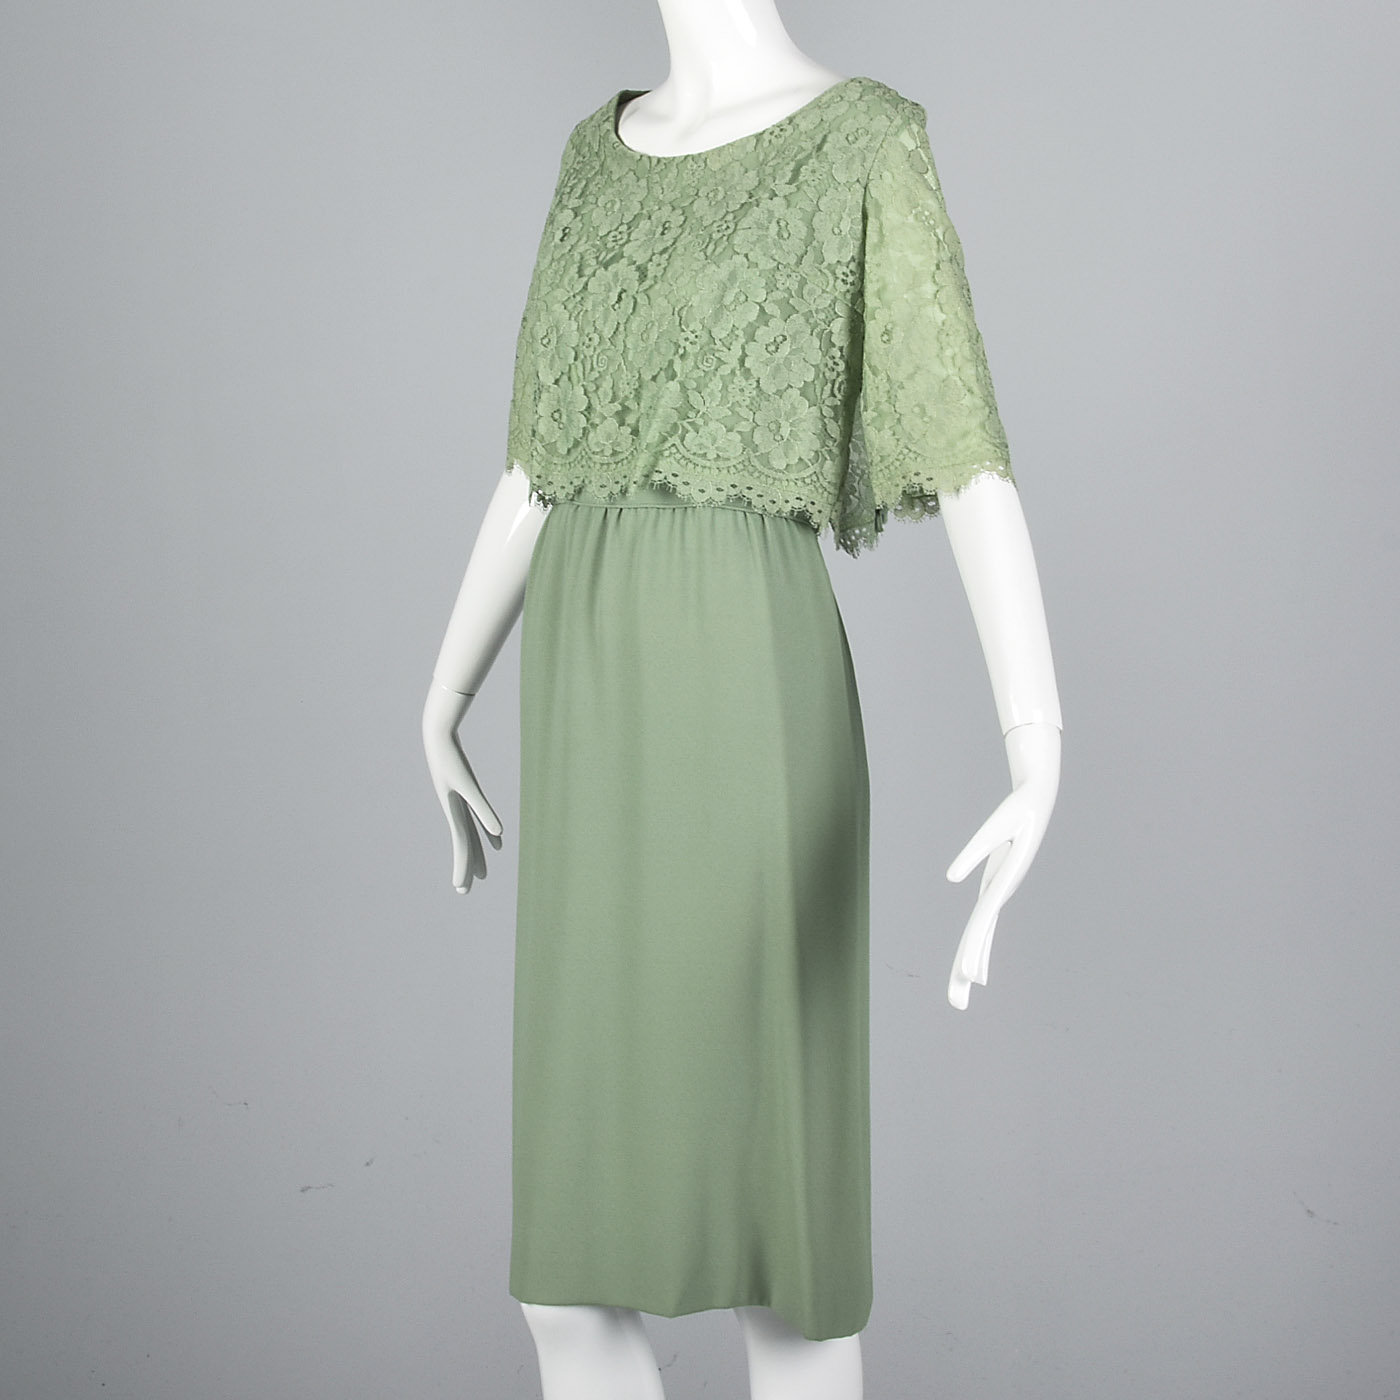 Medium Emma Domb 1960s Dress Green Cocktail Dress Lace Overlay Party ...